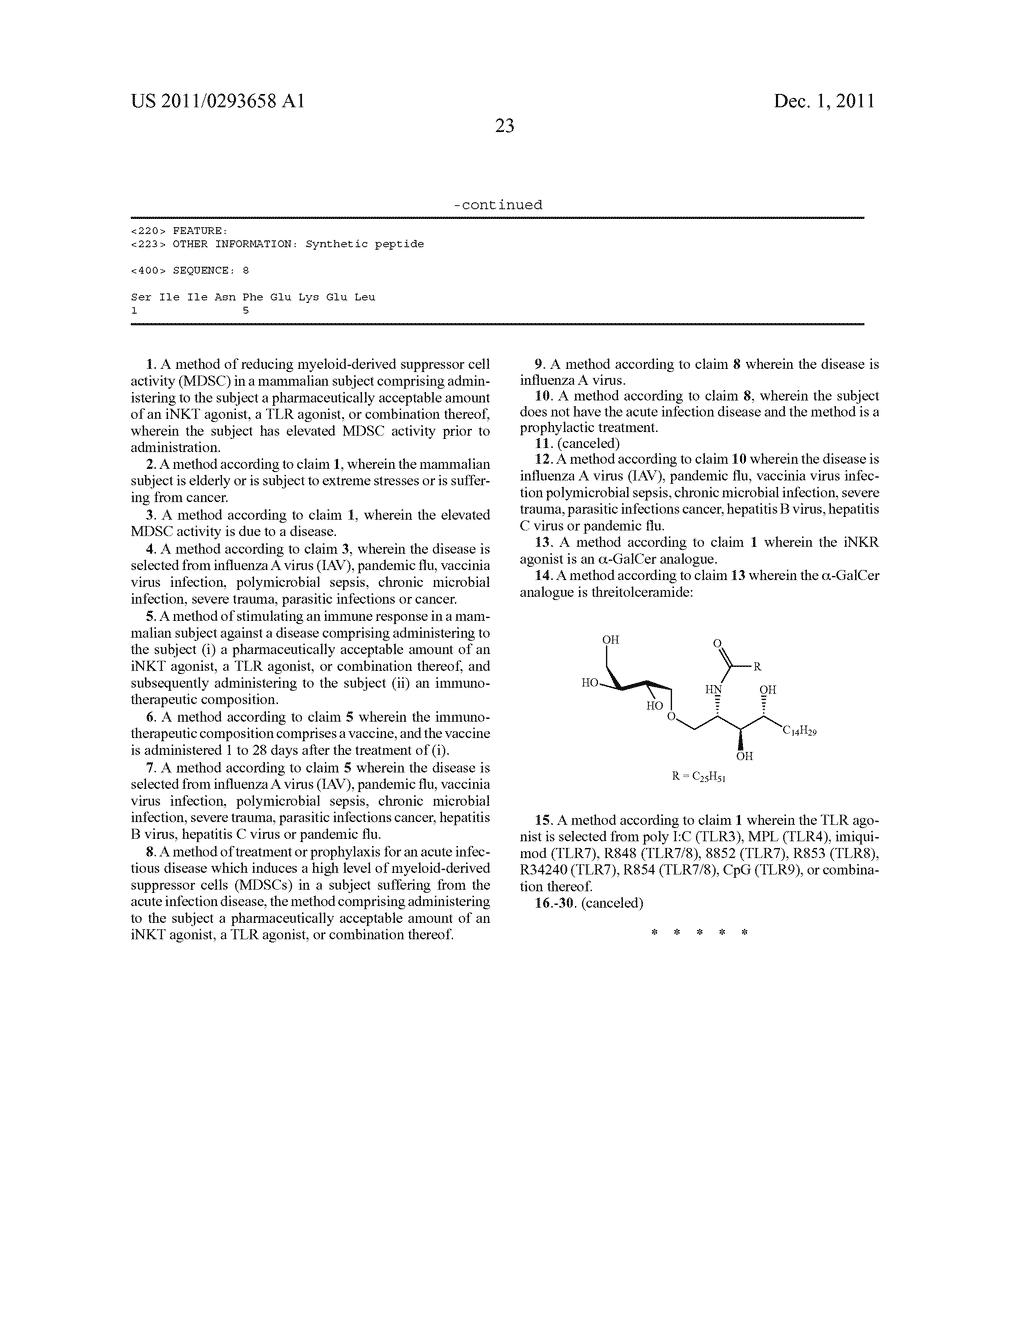 USE OF INKT OR TLR AGONISTS FOR PROTECTING AGAINST OR TREATING A DISEASE     SUCH AS ACUTE INFECTION OR CANCER - diagram, schematic, and image 63